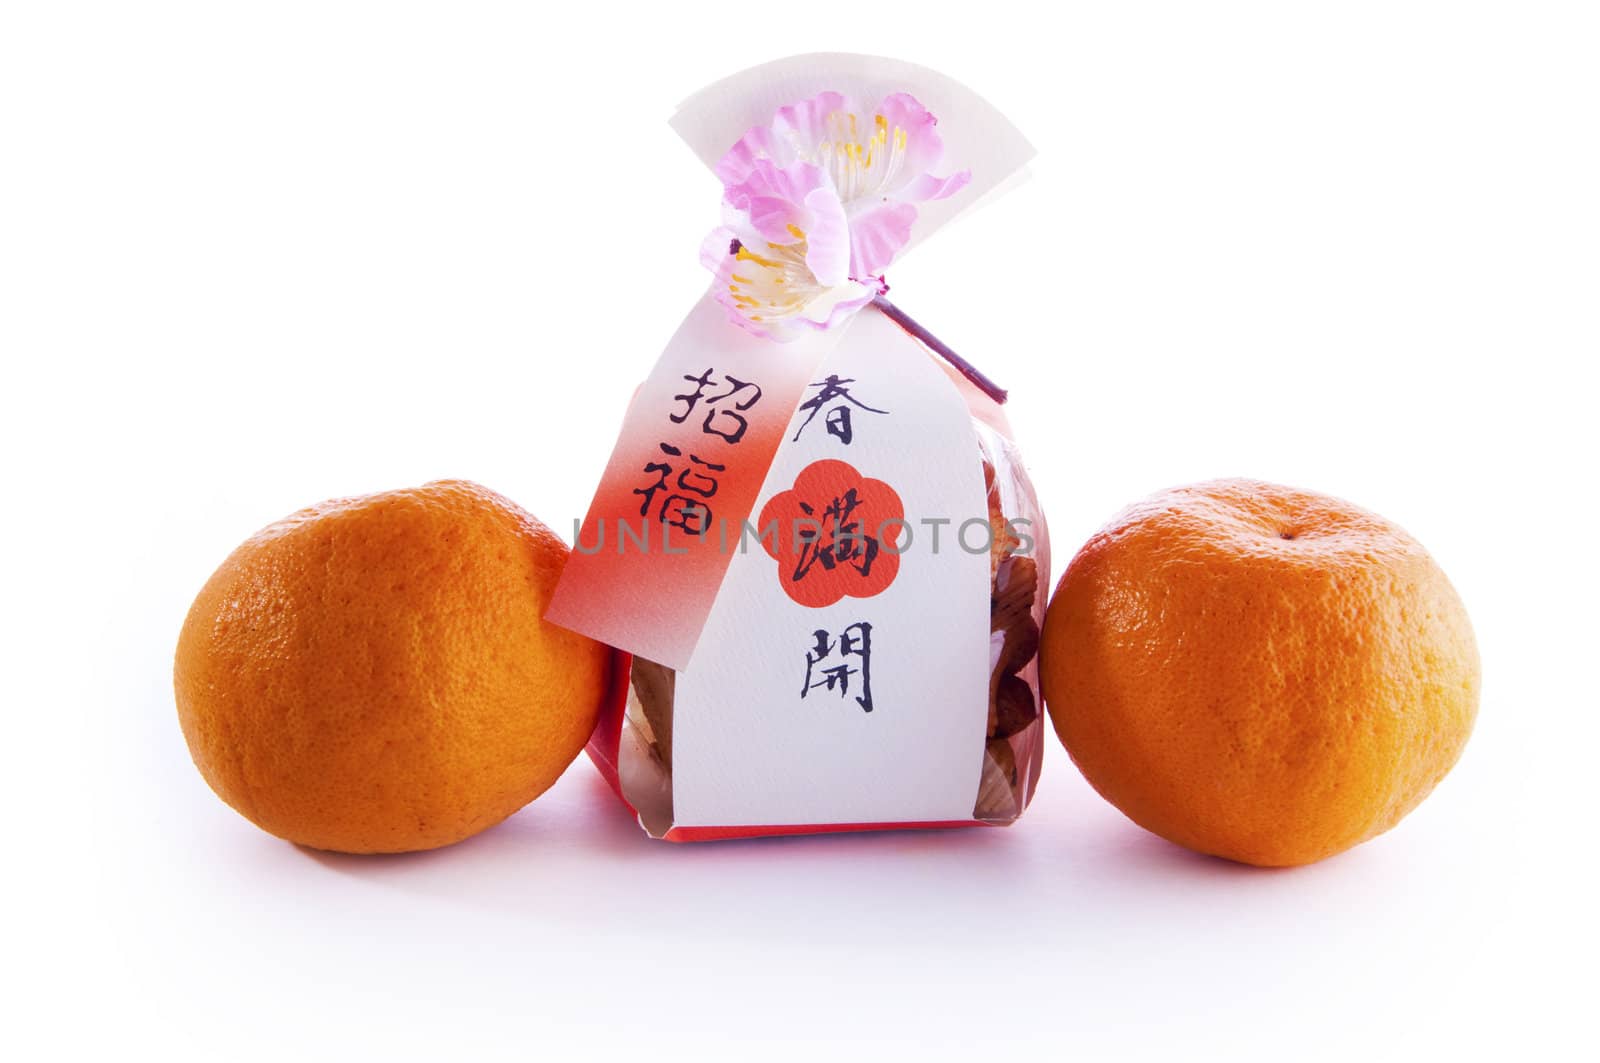 Chinese cookies gift set with tangerine. The Chinese words means spring season and prosperous.